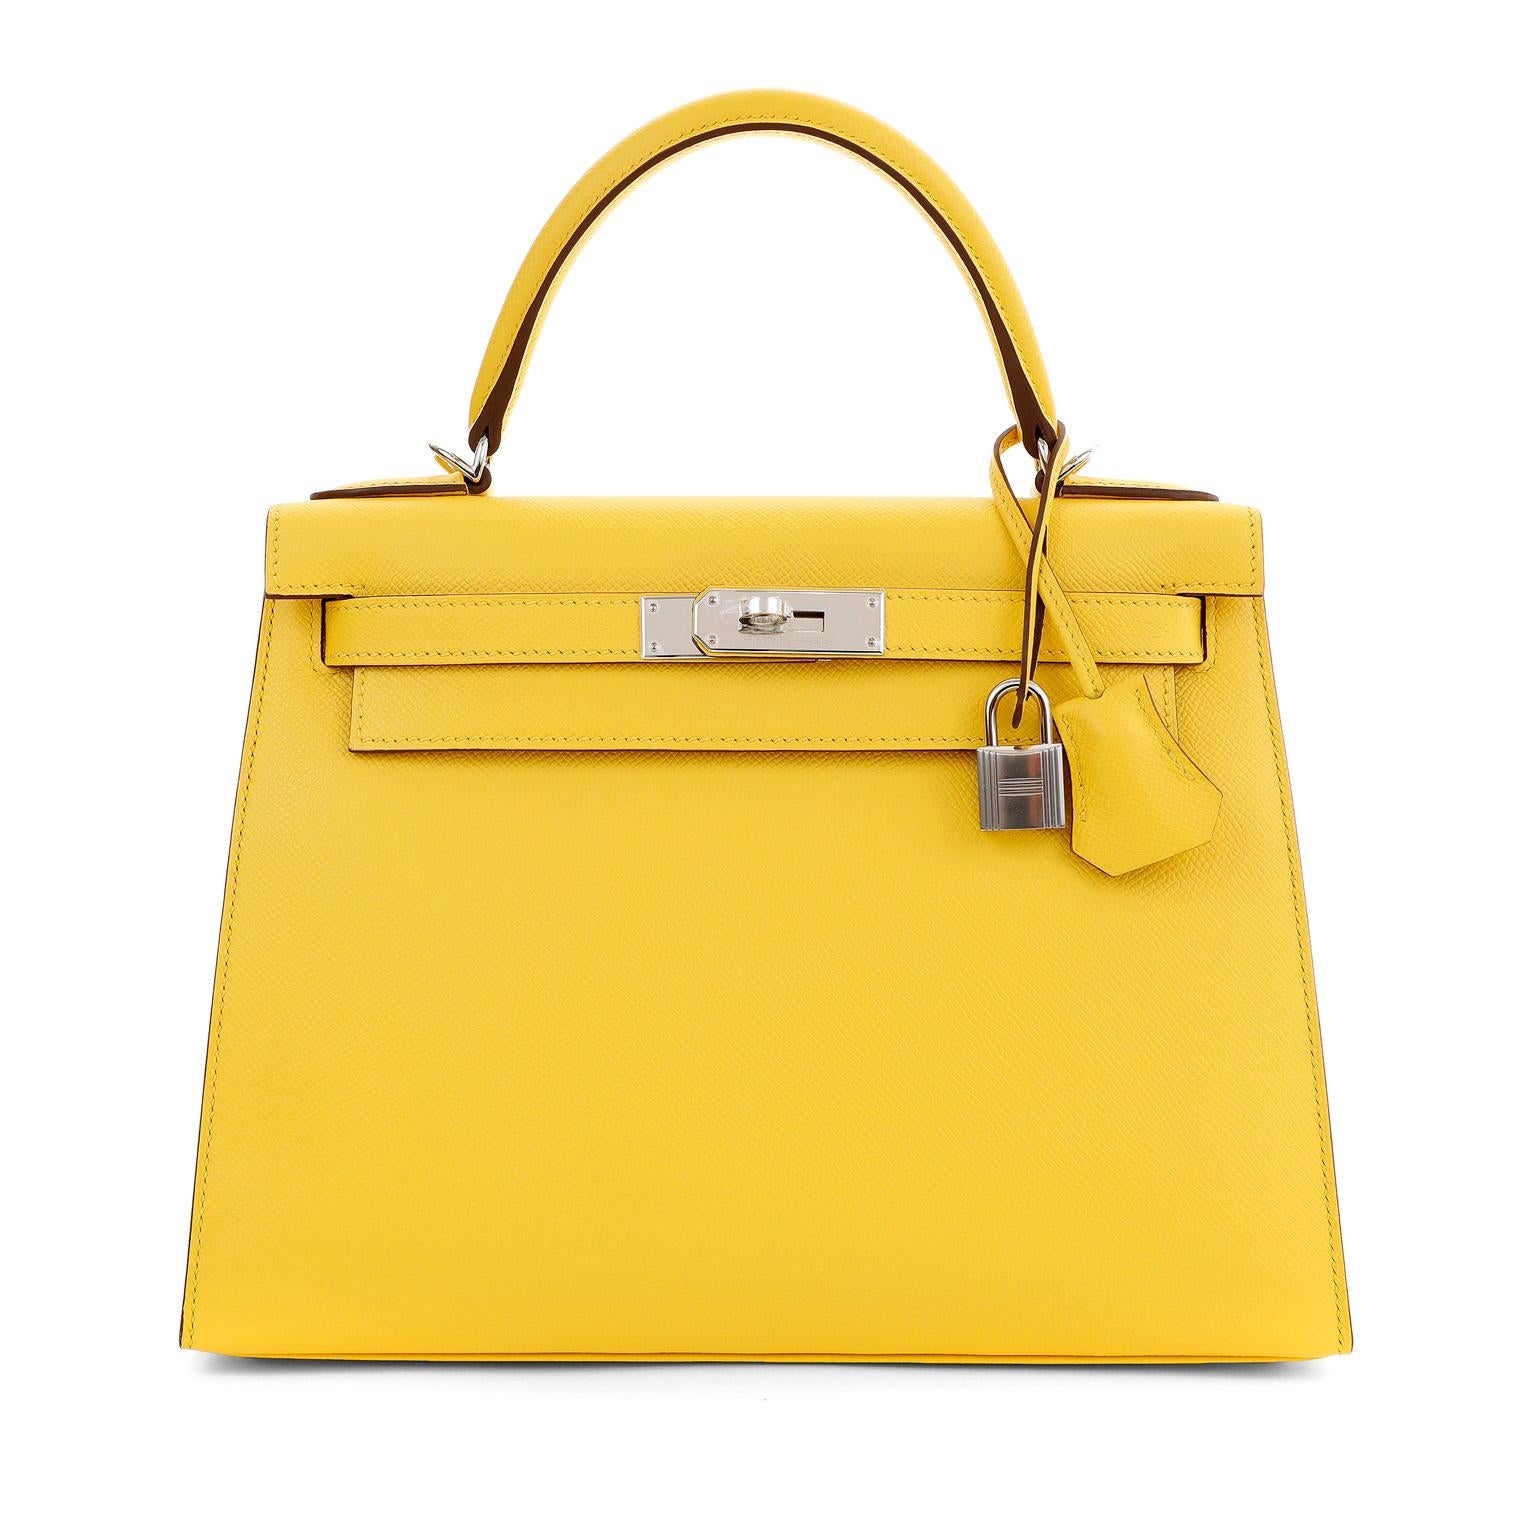 This authentic Hermès 28 cm Jaune de Naples Yellow Epsom Kelly Sellier is in pristine condition with the protective plastic intact on the hardware.   Hermès bags are considered the ultimate luxury item worldwide.  Each piece is handcrafted with